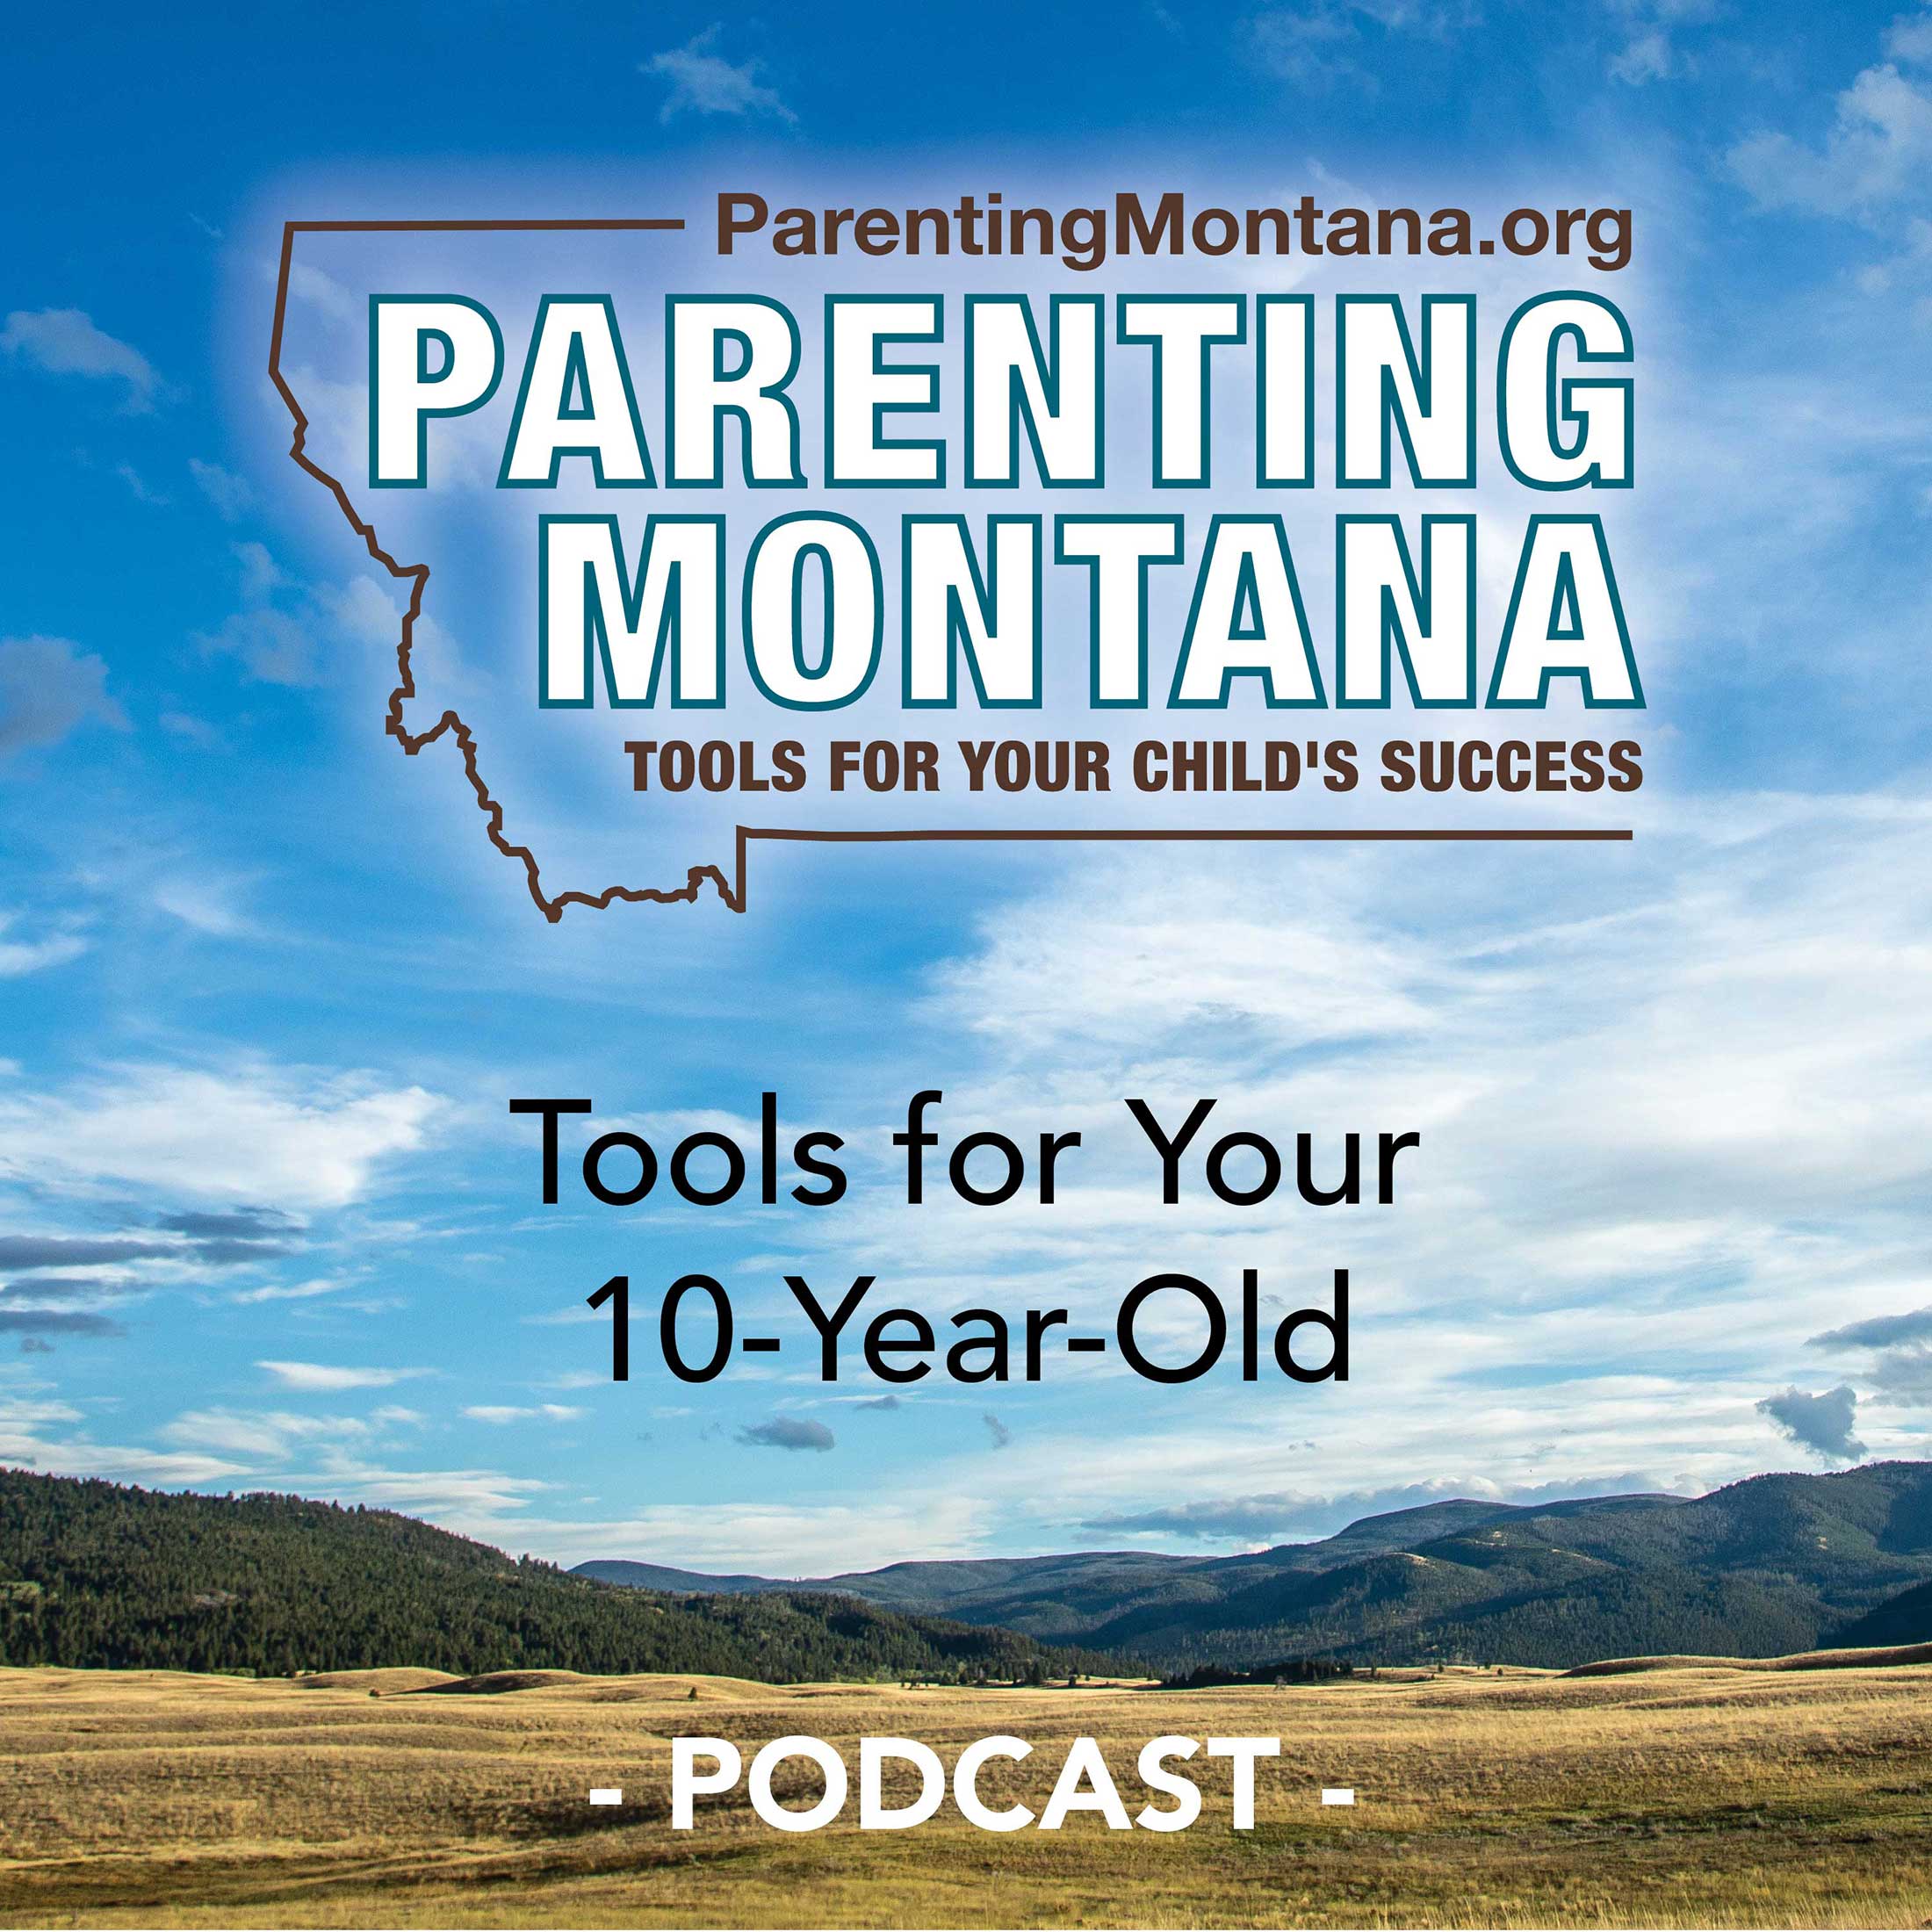 Artwork for podcast 10-Year-Old Parenting Montana Tools